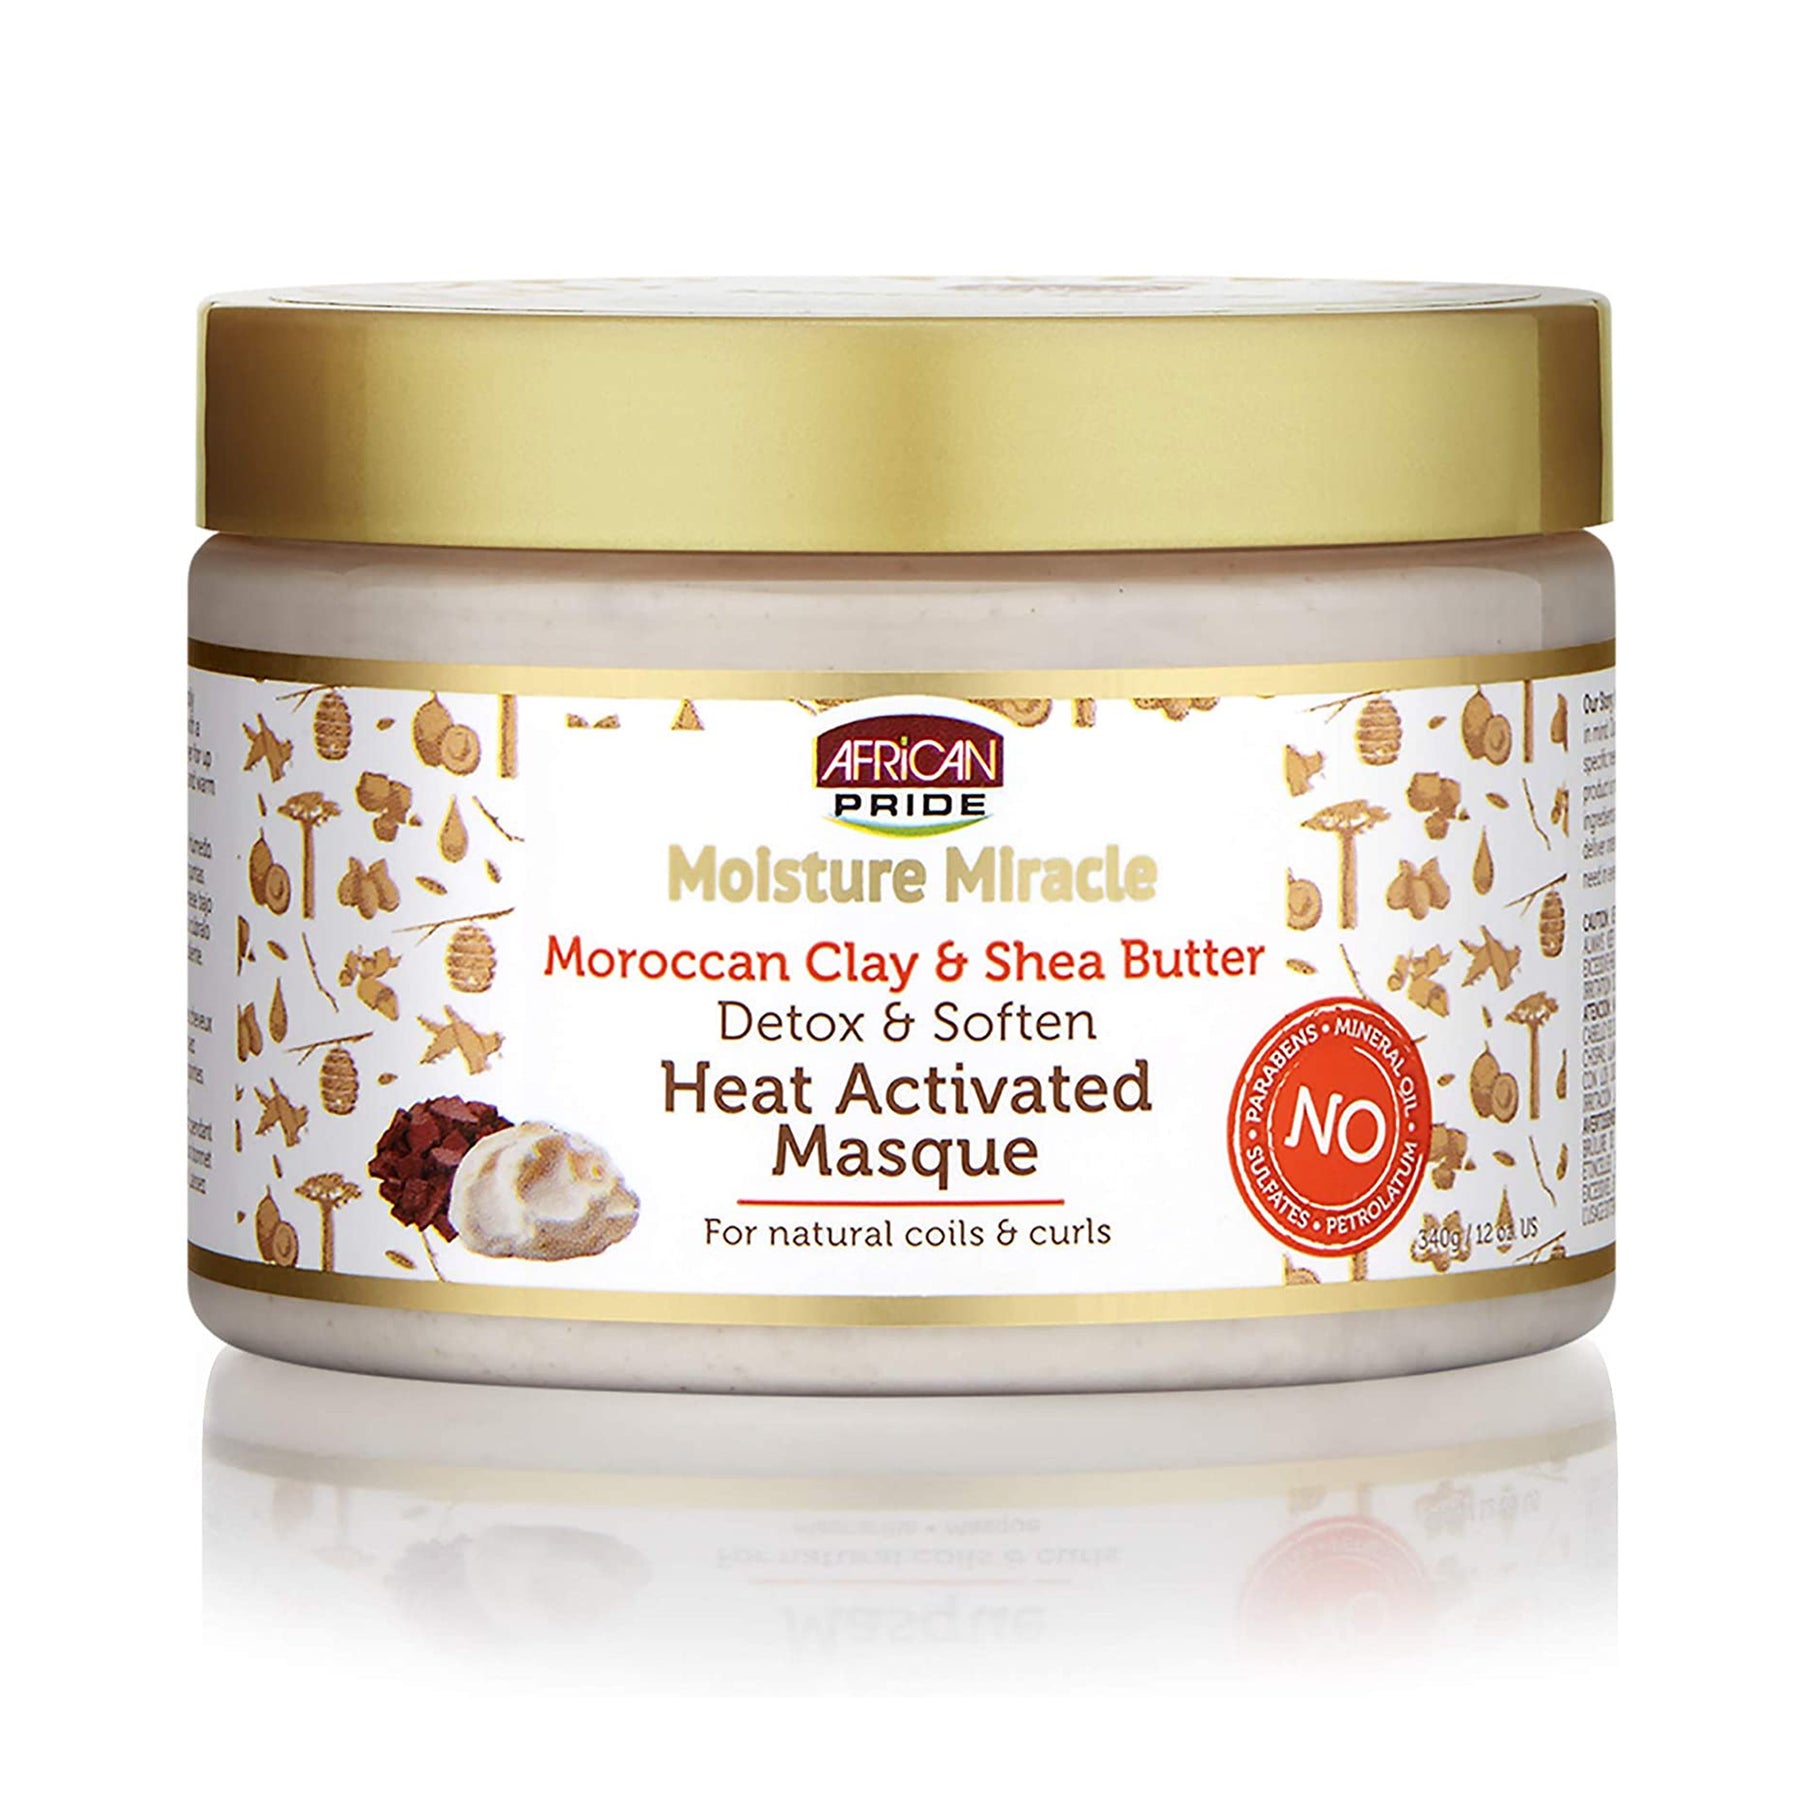 African Pride Moroccan Clay & Shea Butter Heat Activated Masque 340g- AQ Online